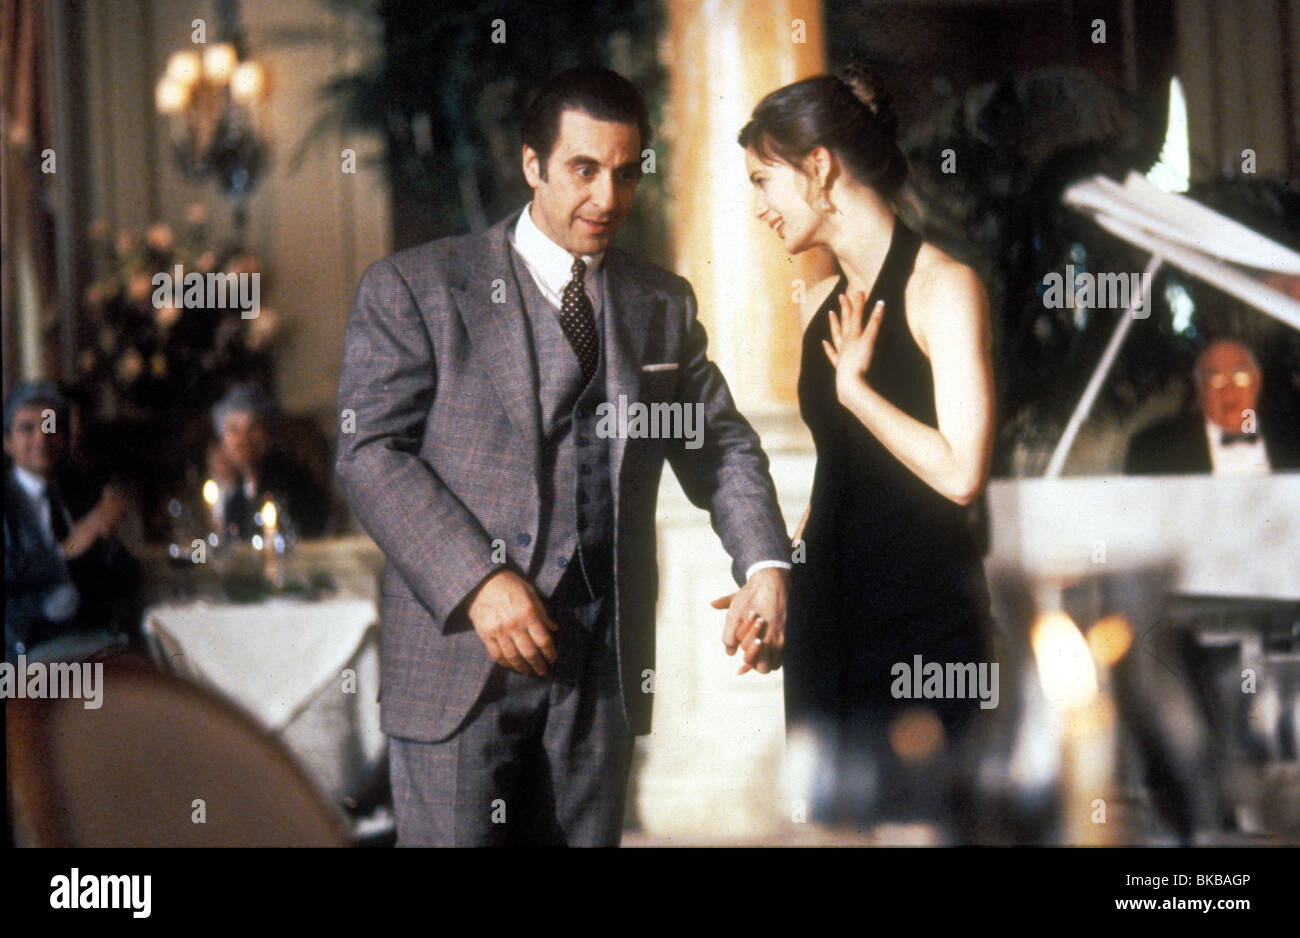 SCENT OF A WOMAN (1992) AL PACINO, GABRIELLE ANWAR SCW 094 Stock Photo